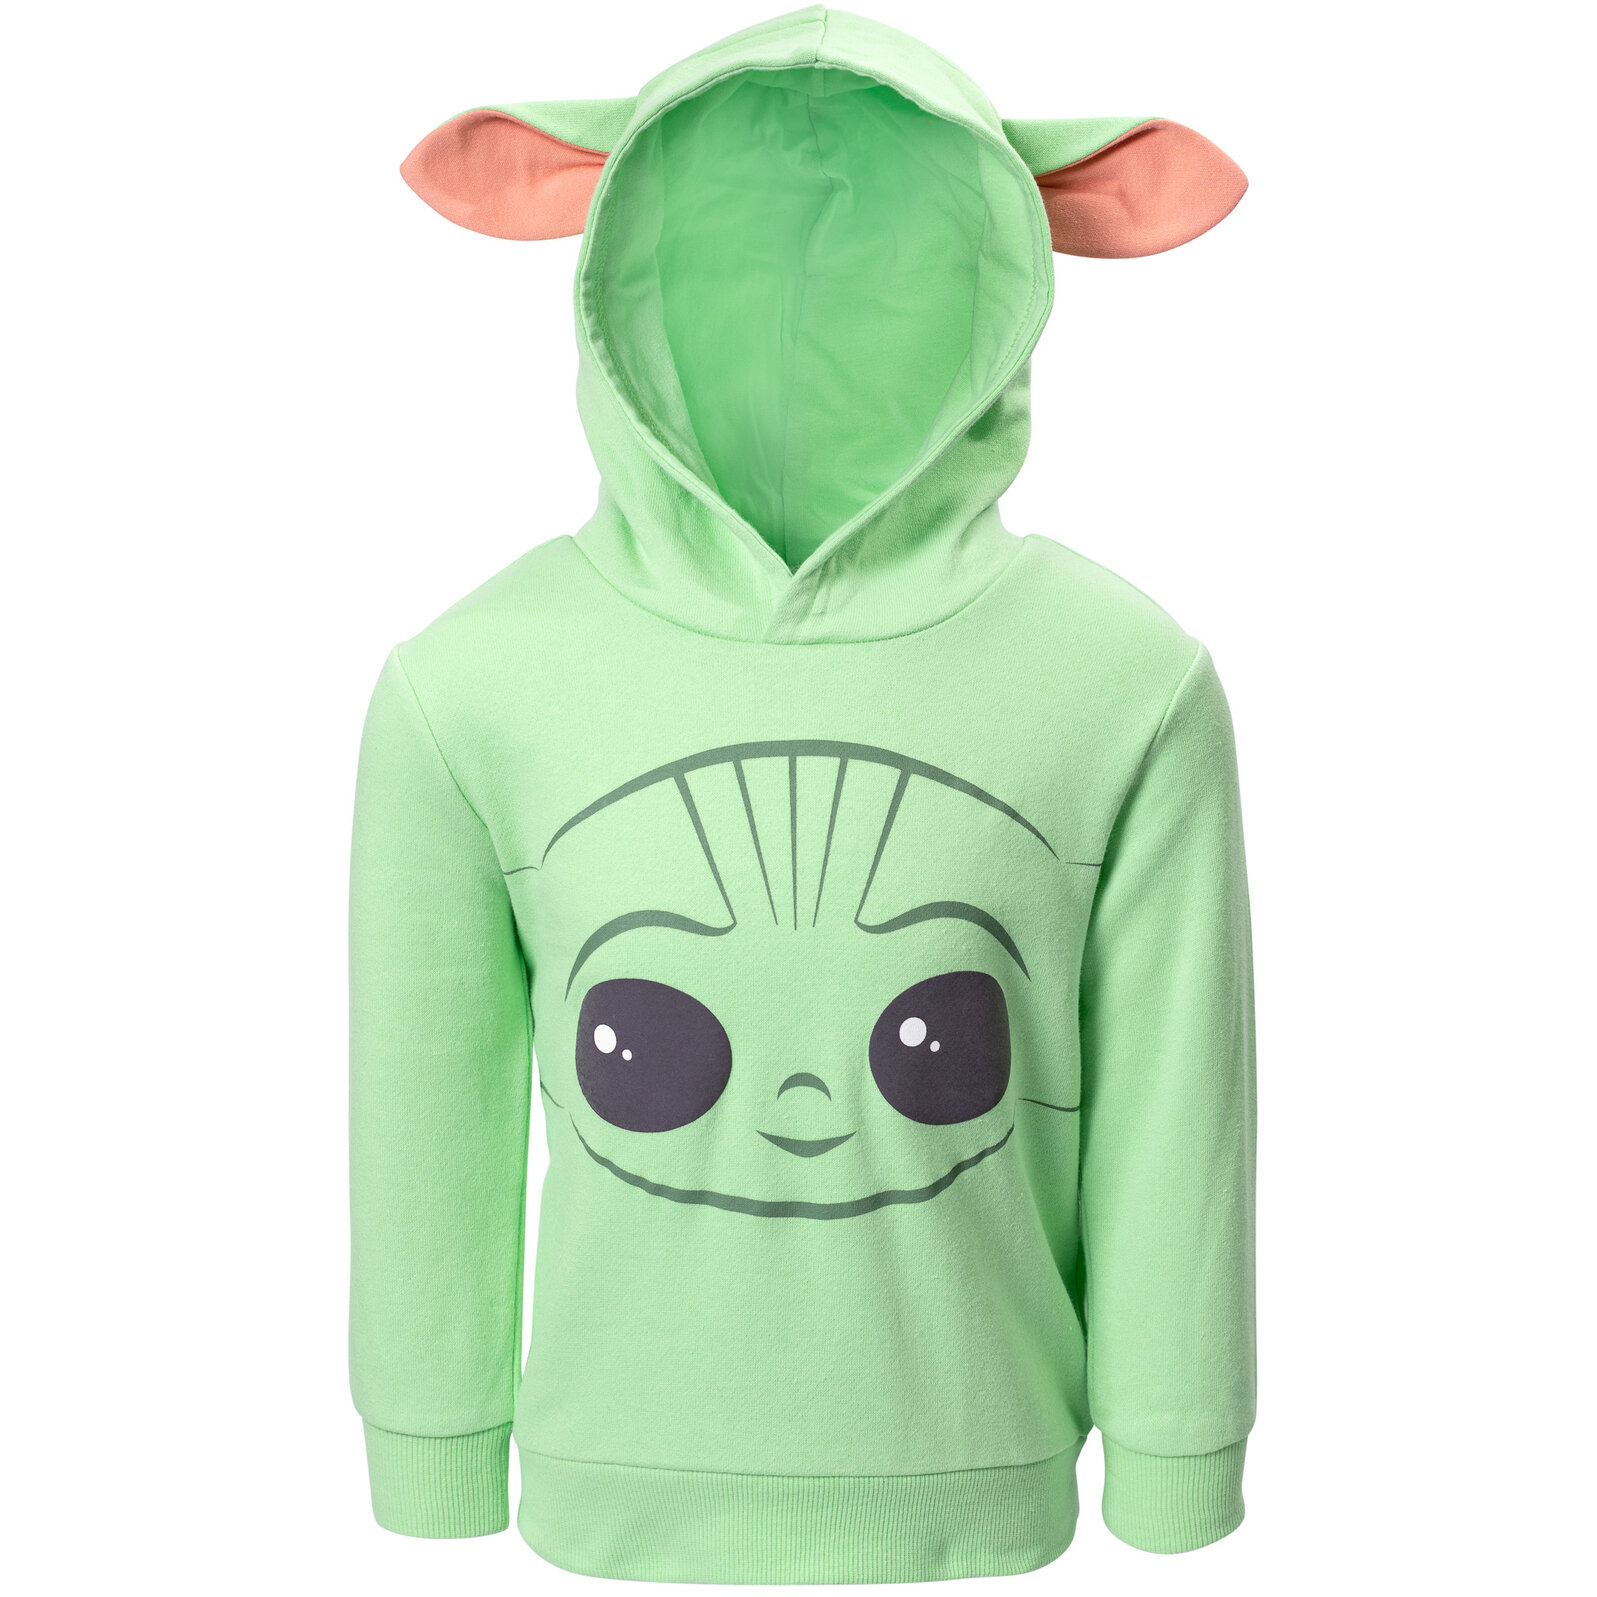 Star Wars Baby Yoda The Mandalorian Boy's Pullover Fleece Hoodie Fancy-Dress Costume for Toddler, 4T - image 1 of 5